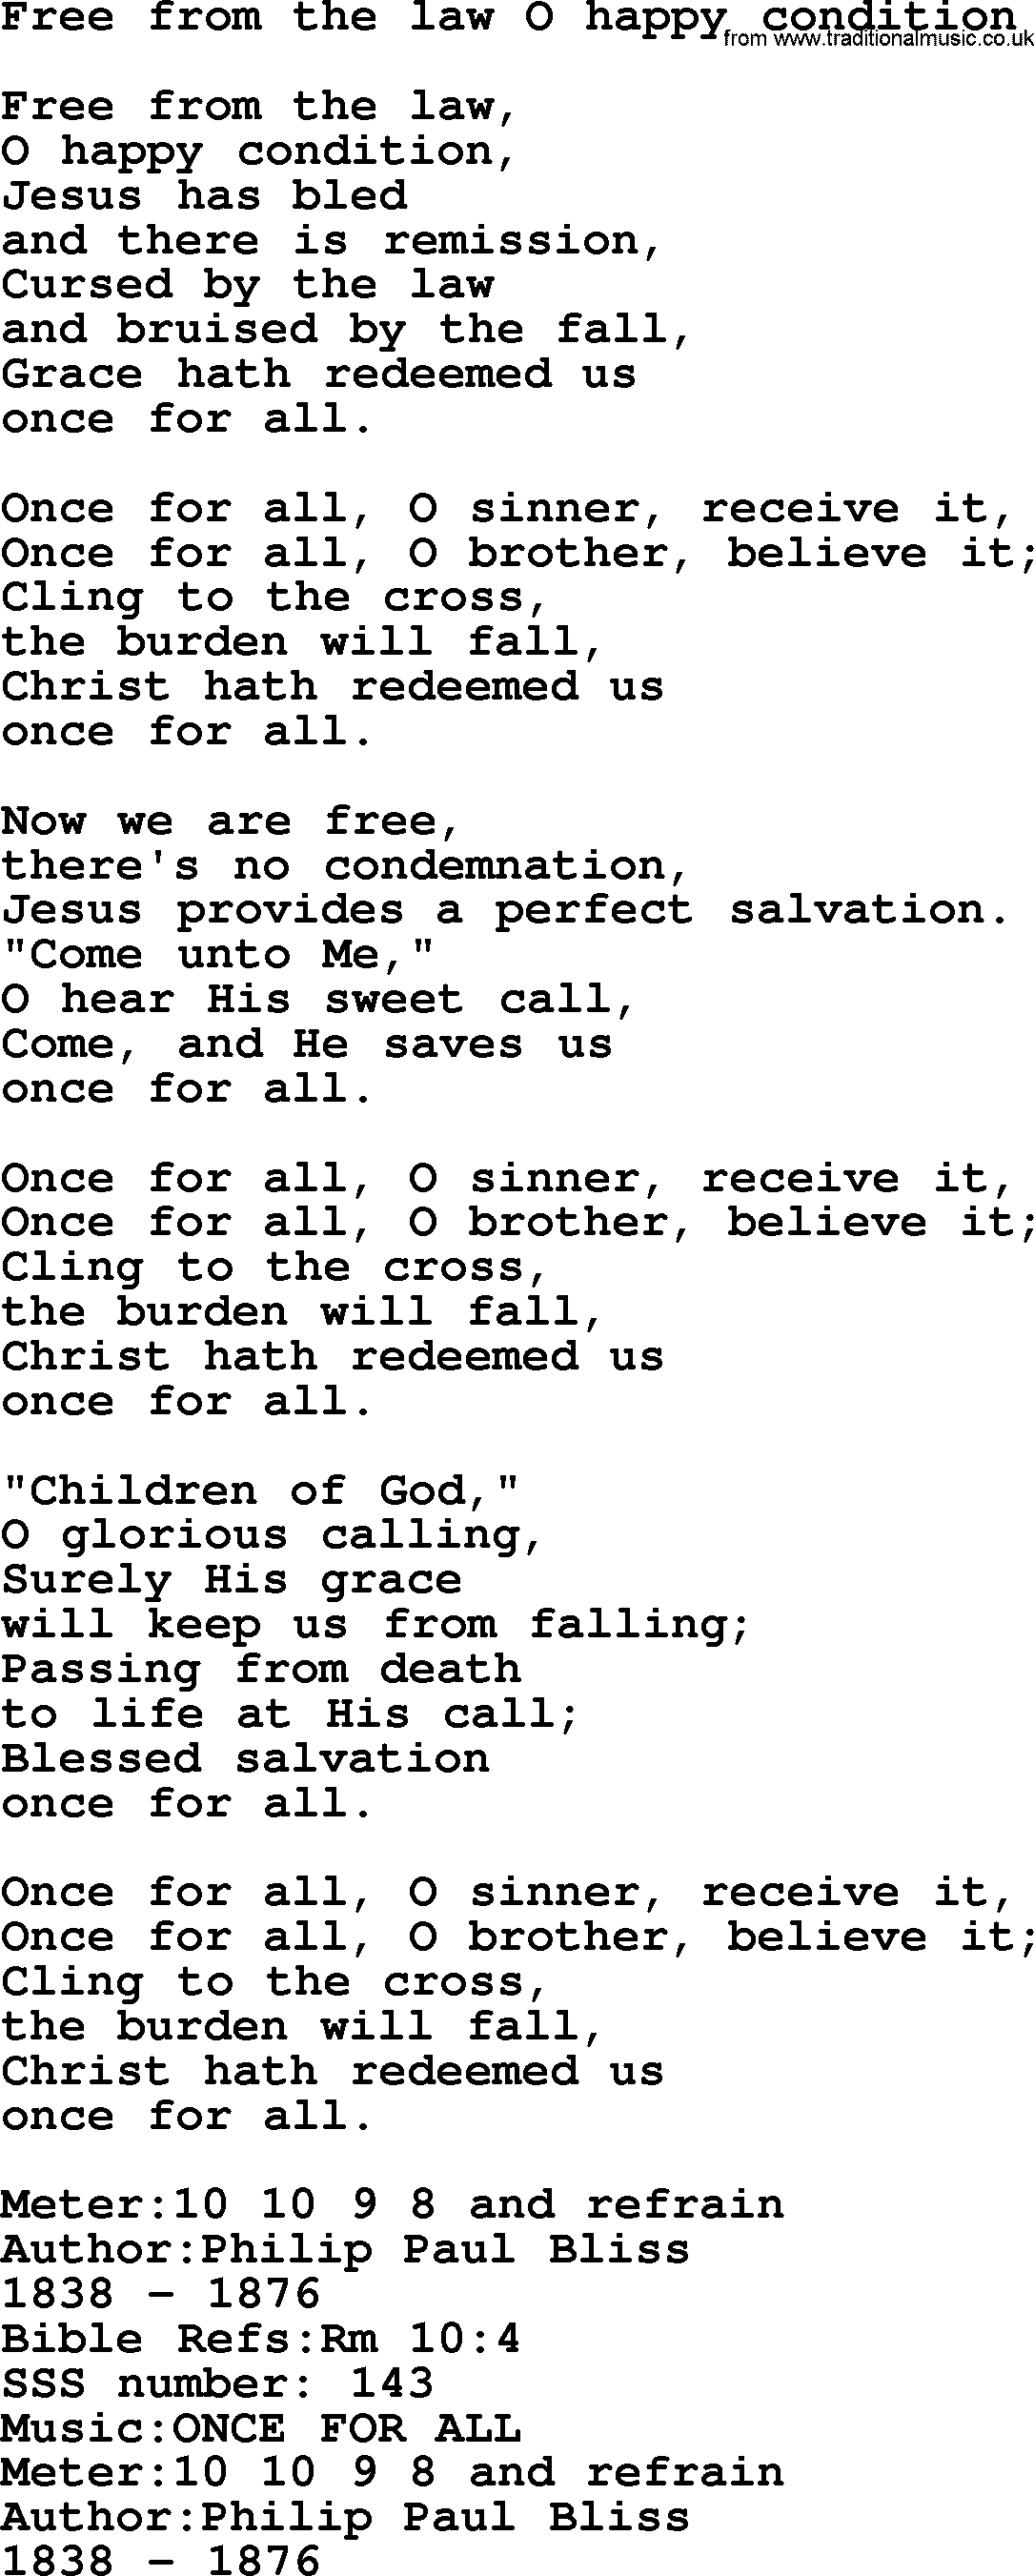 Sacred Songs and Solos complete, 1200 Hymns, title: Free From The Law O Happy Condition, lyrics and PDF